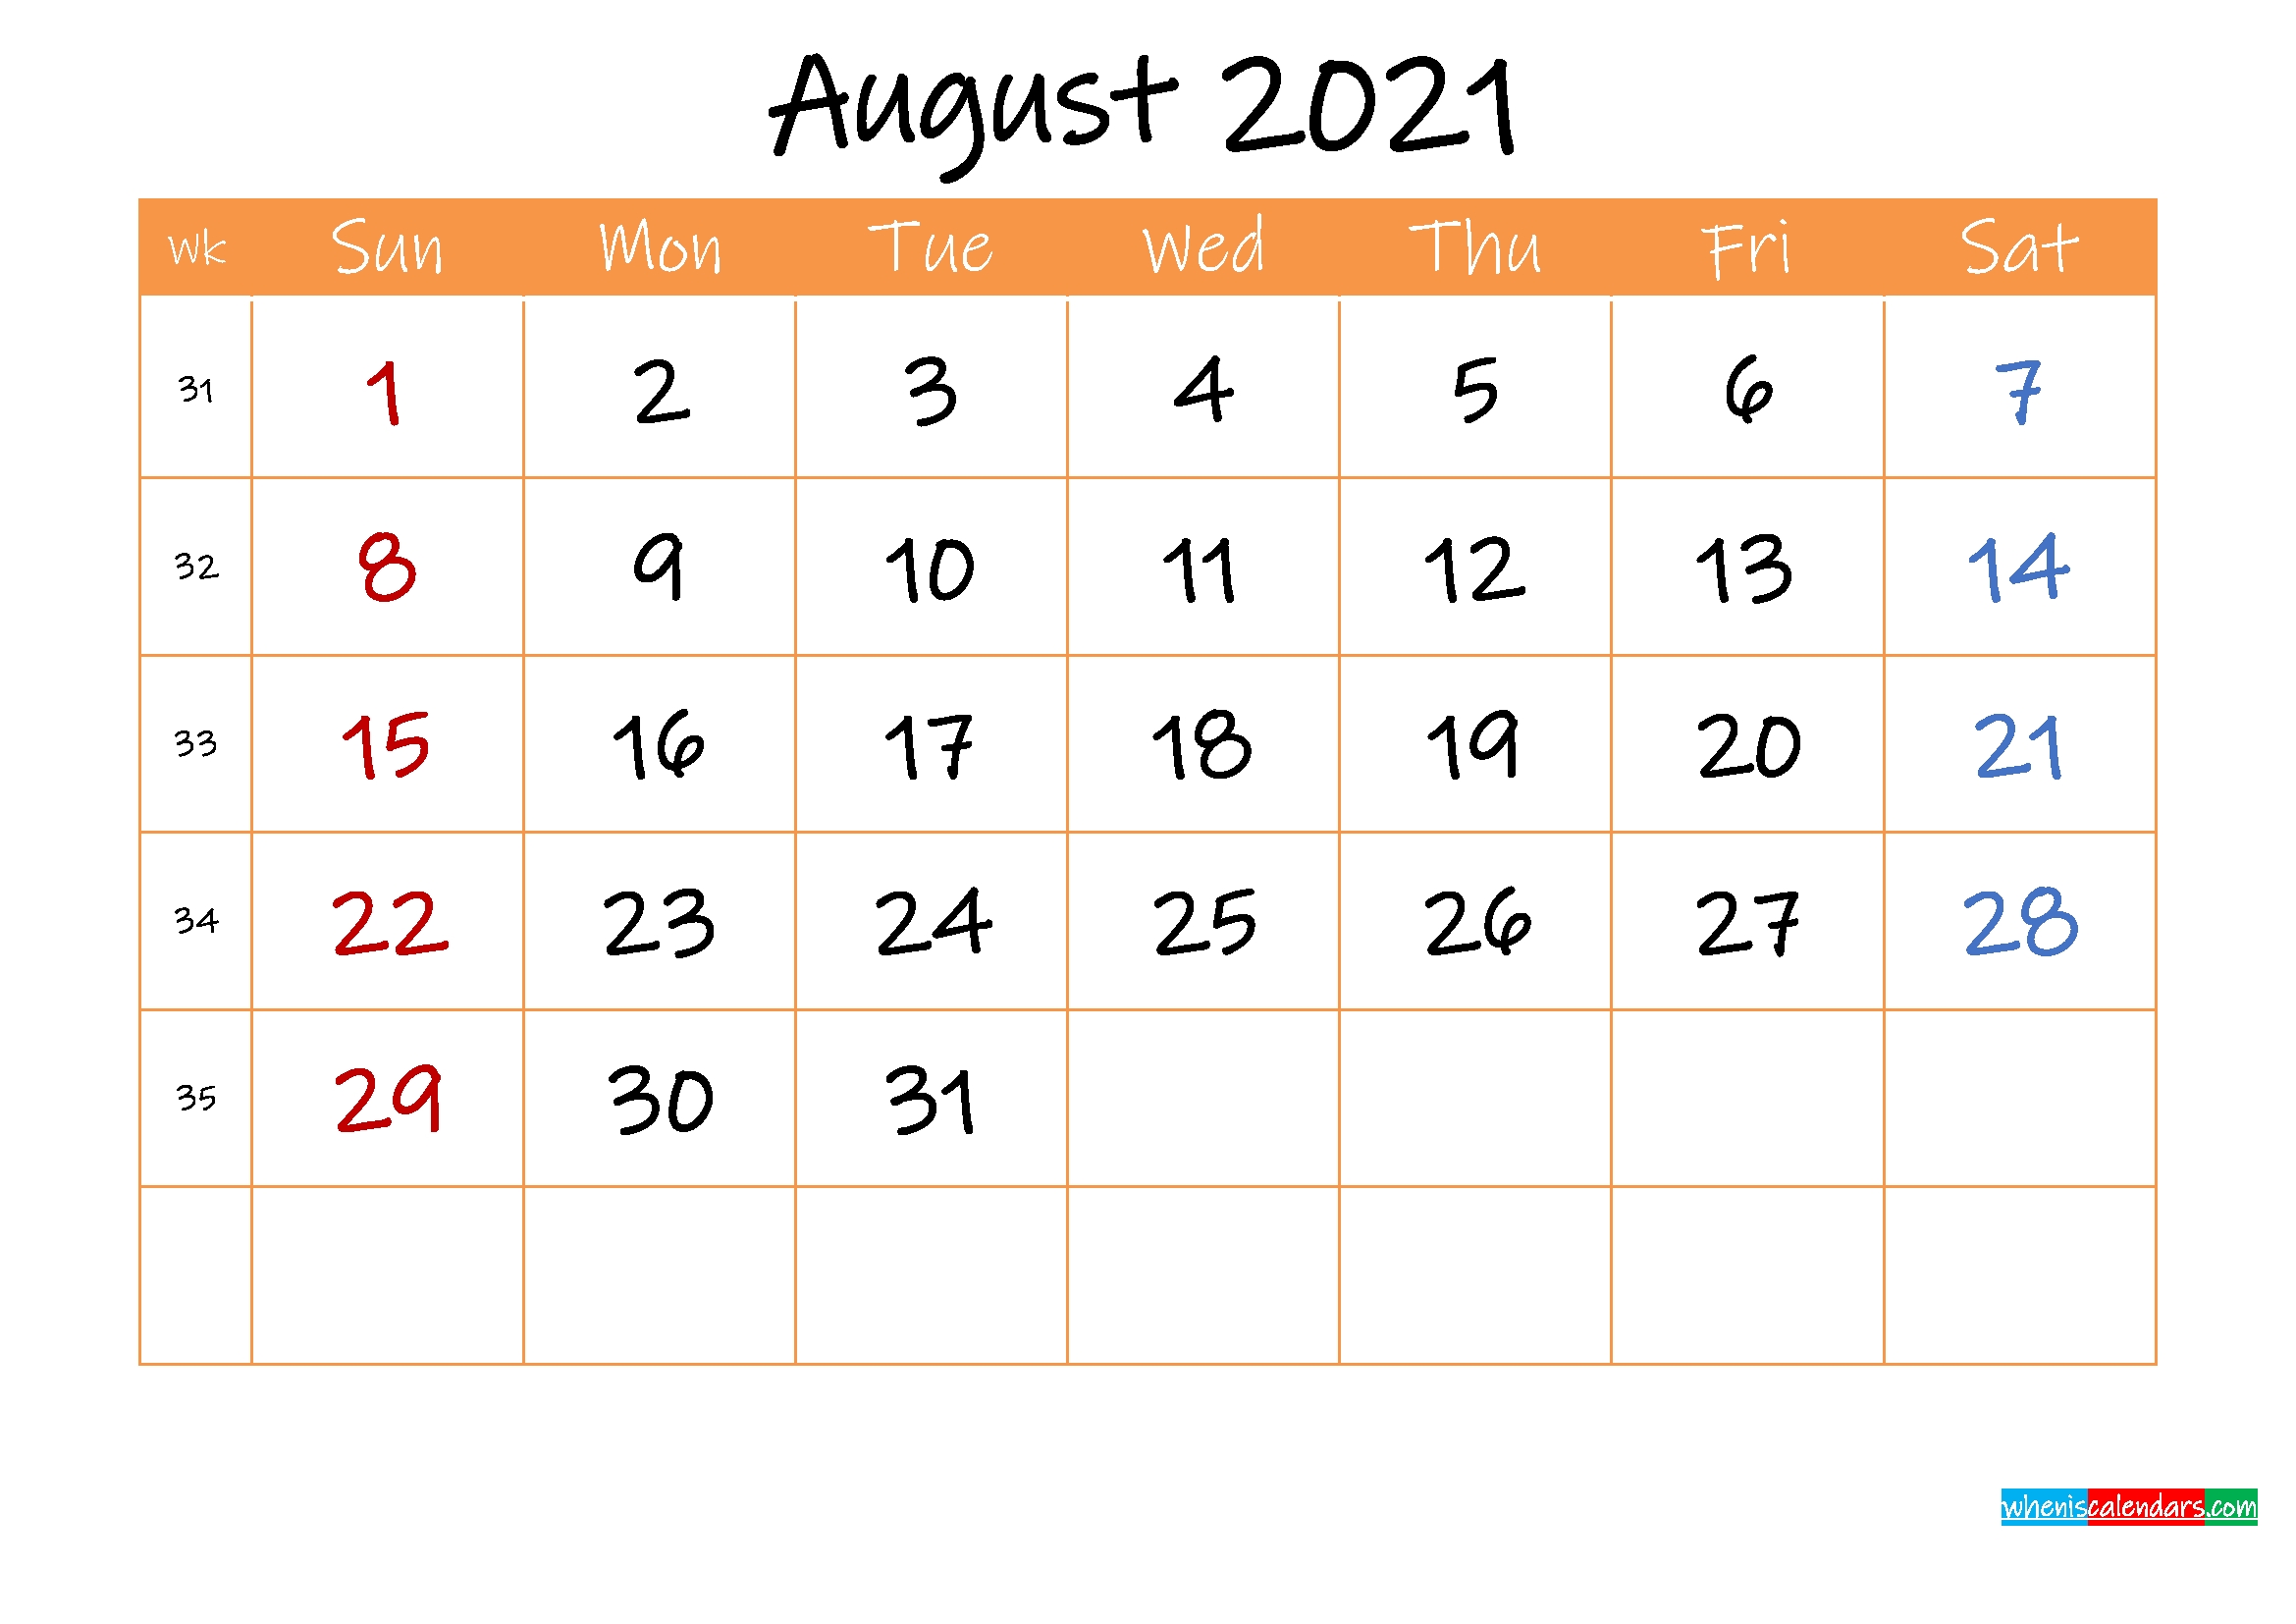 Free Printable Calendar August 2021 - Template Ink21M80 Blank Calendar Pages August 2021